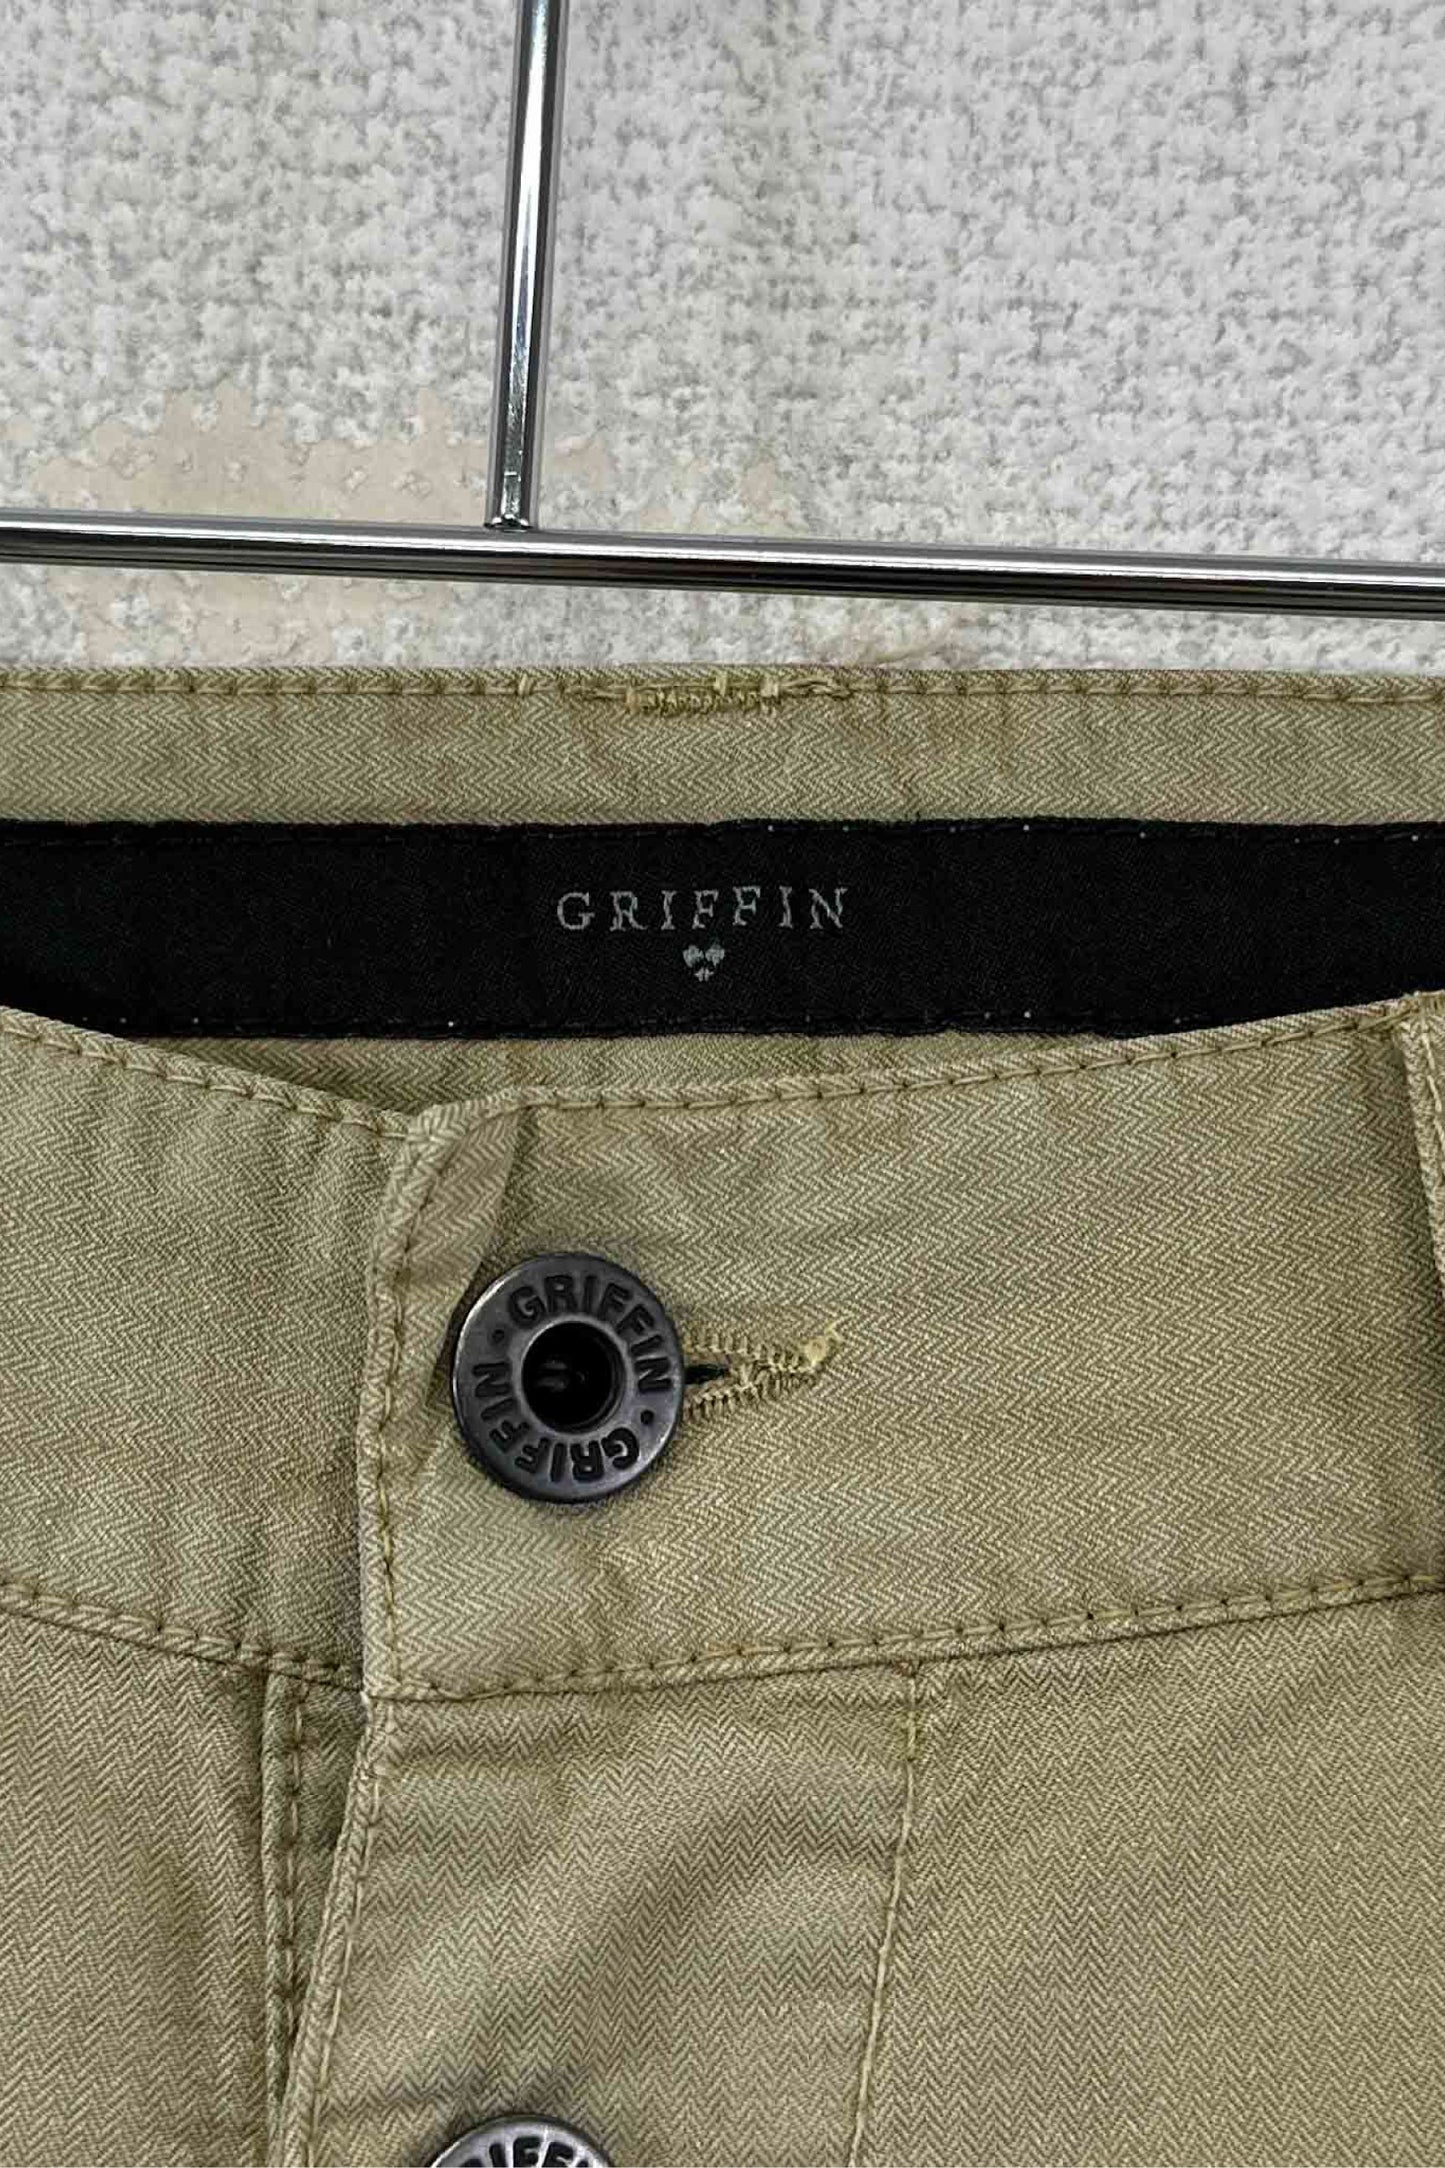 Made in ITALY GRIFFIN work pants